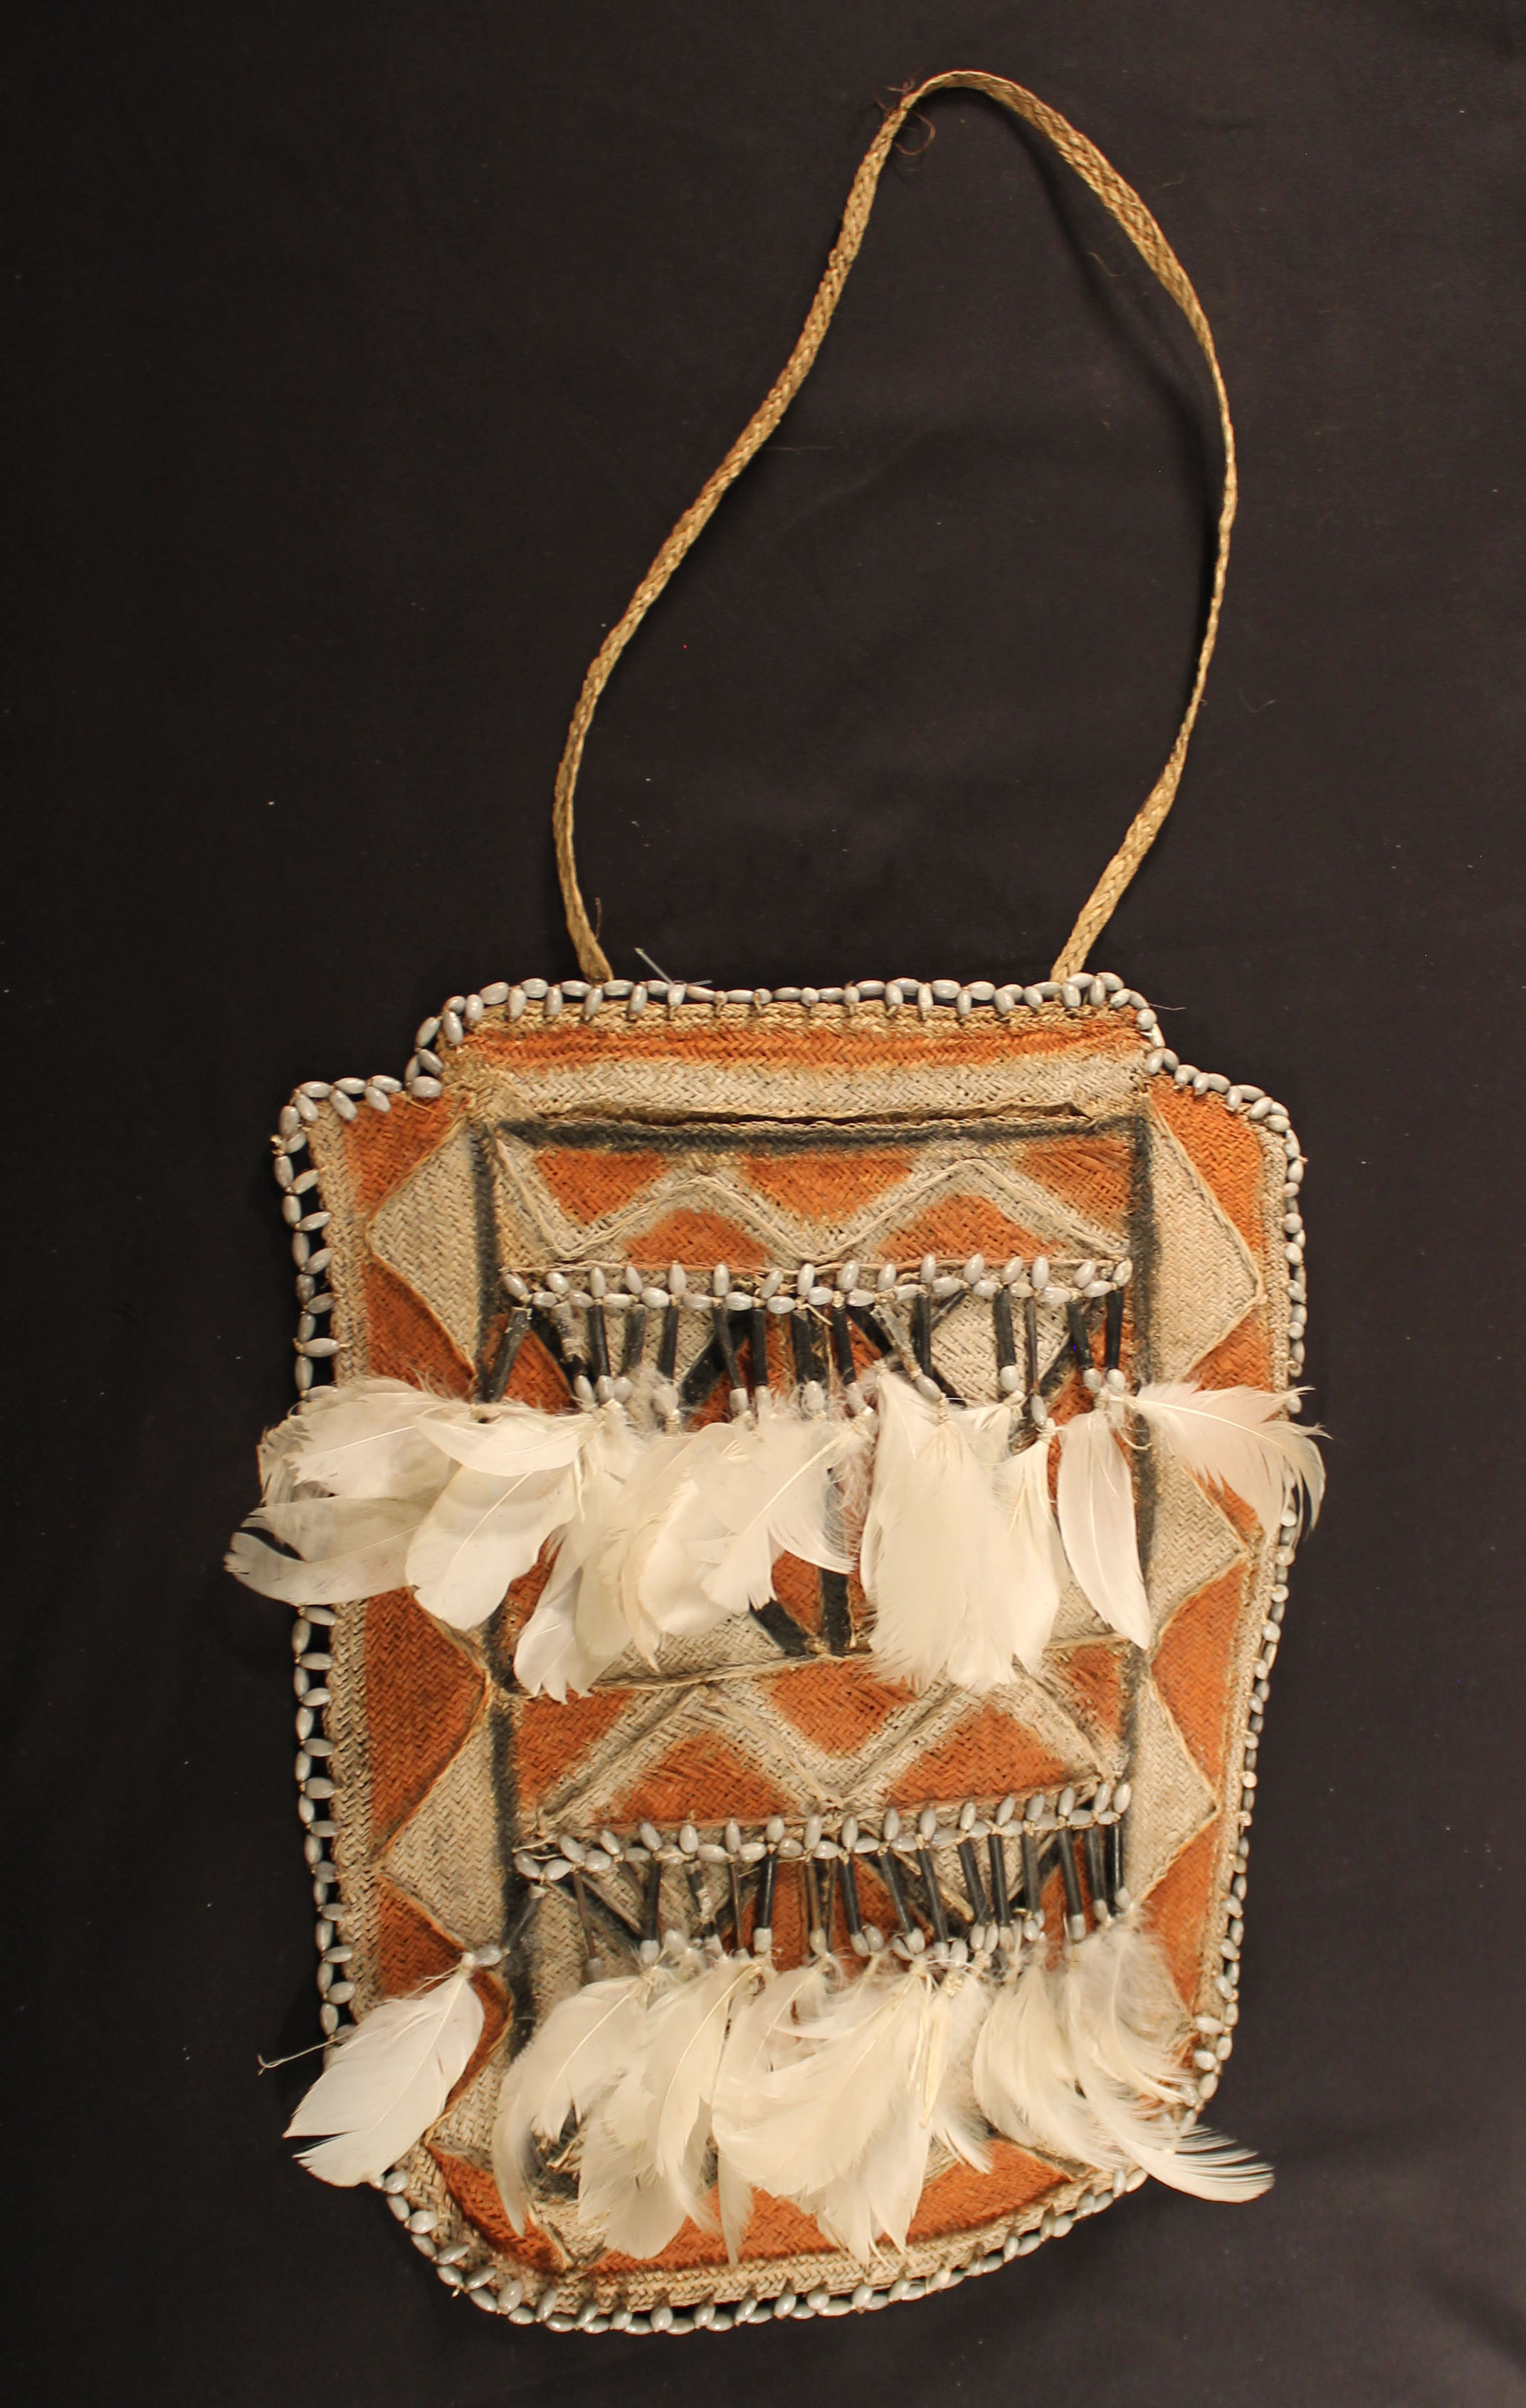 Woven bag with symbolic designs covered with an orange and white triangle and has white feather trim